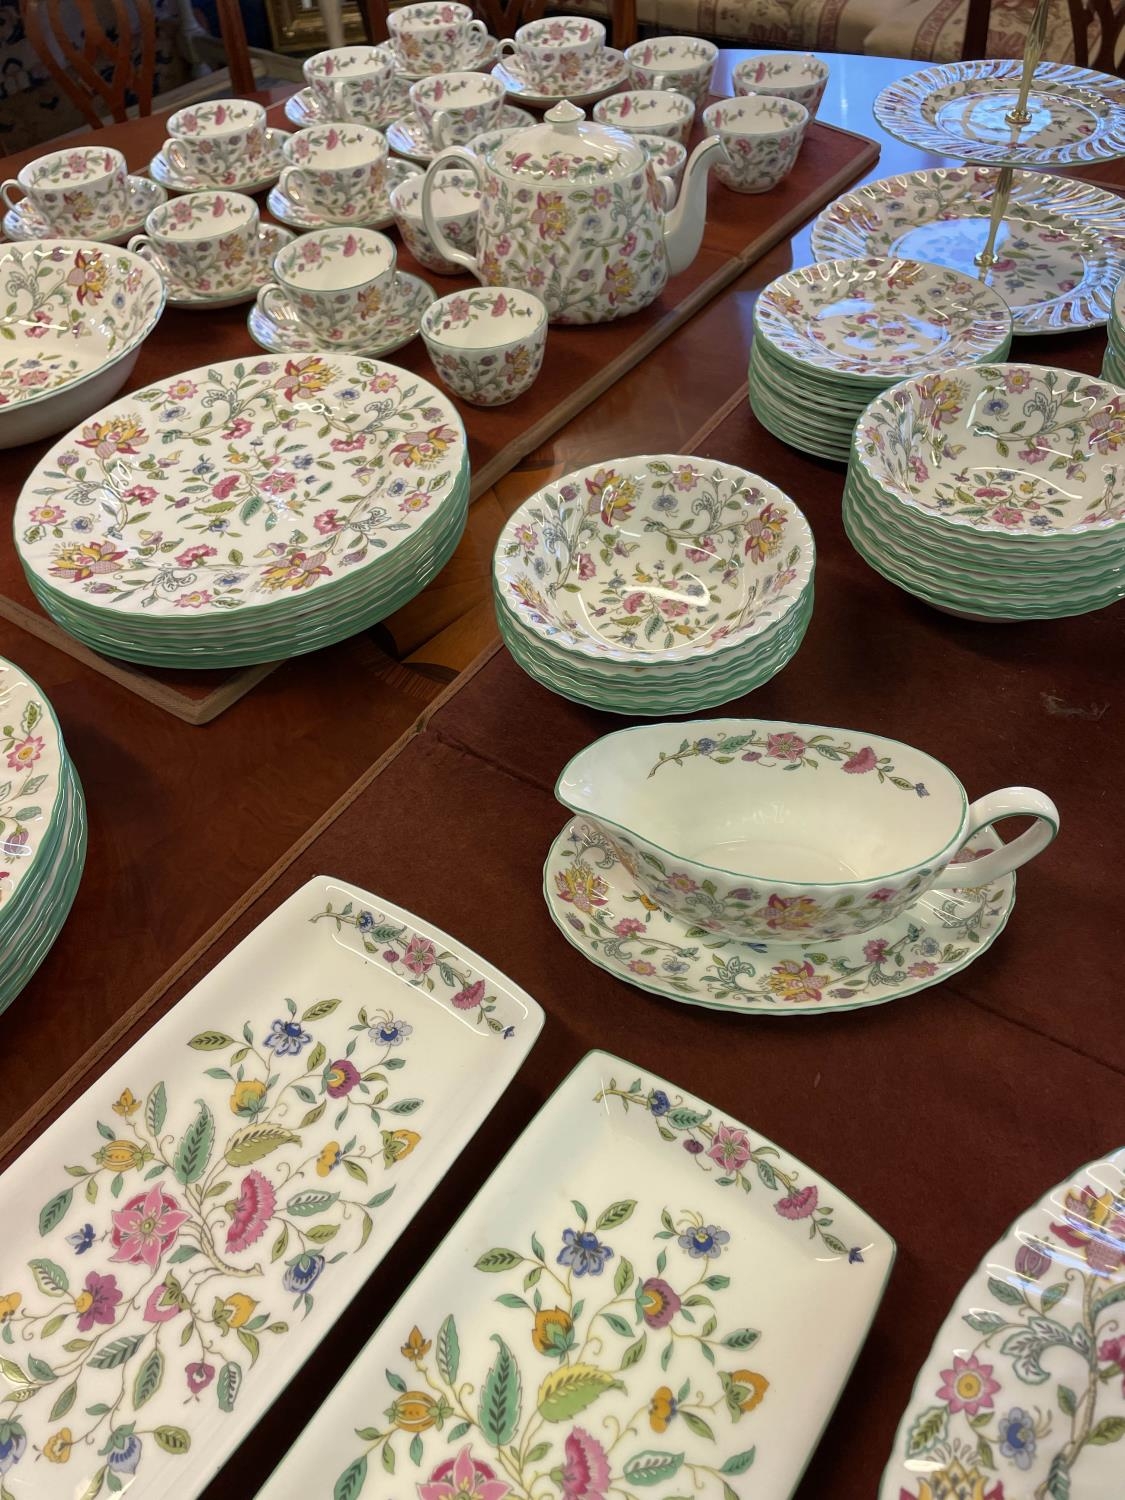 MINTON DINNER SERVICE, 'Haddon Hall' pattern, including fifteen dinner plates, fifteen bowls, - Image 6 of 6